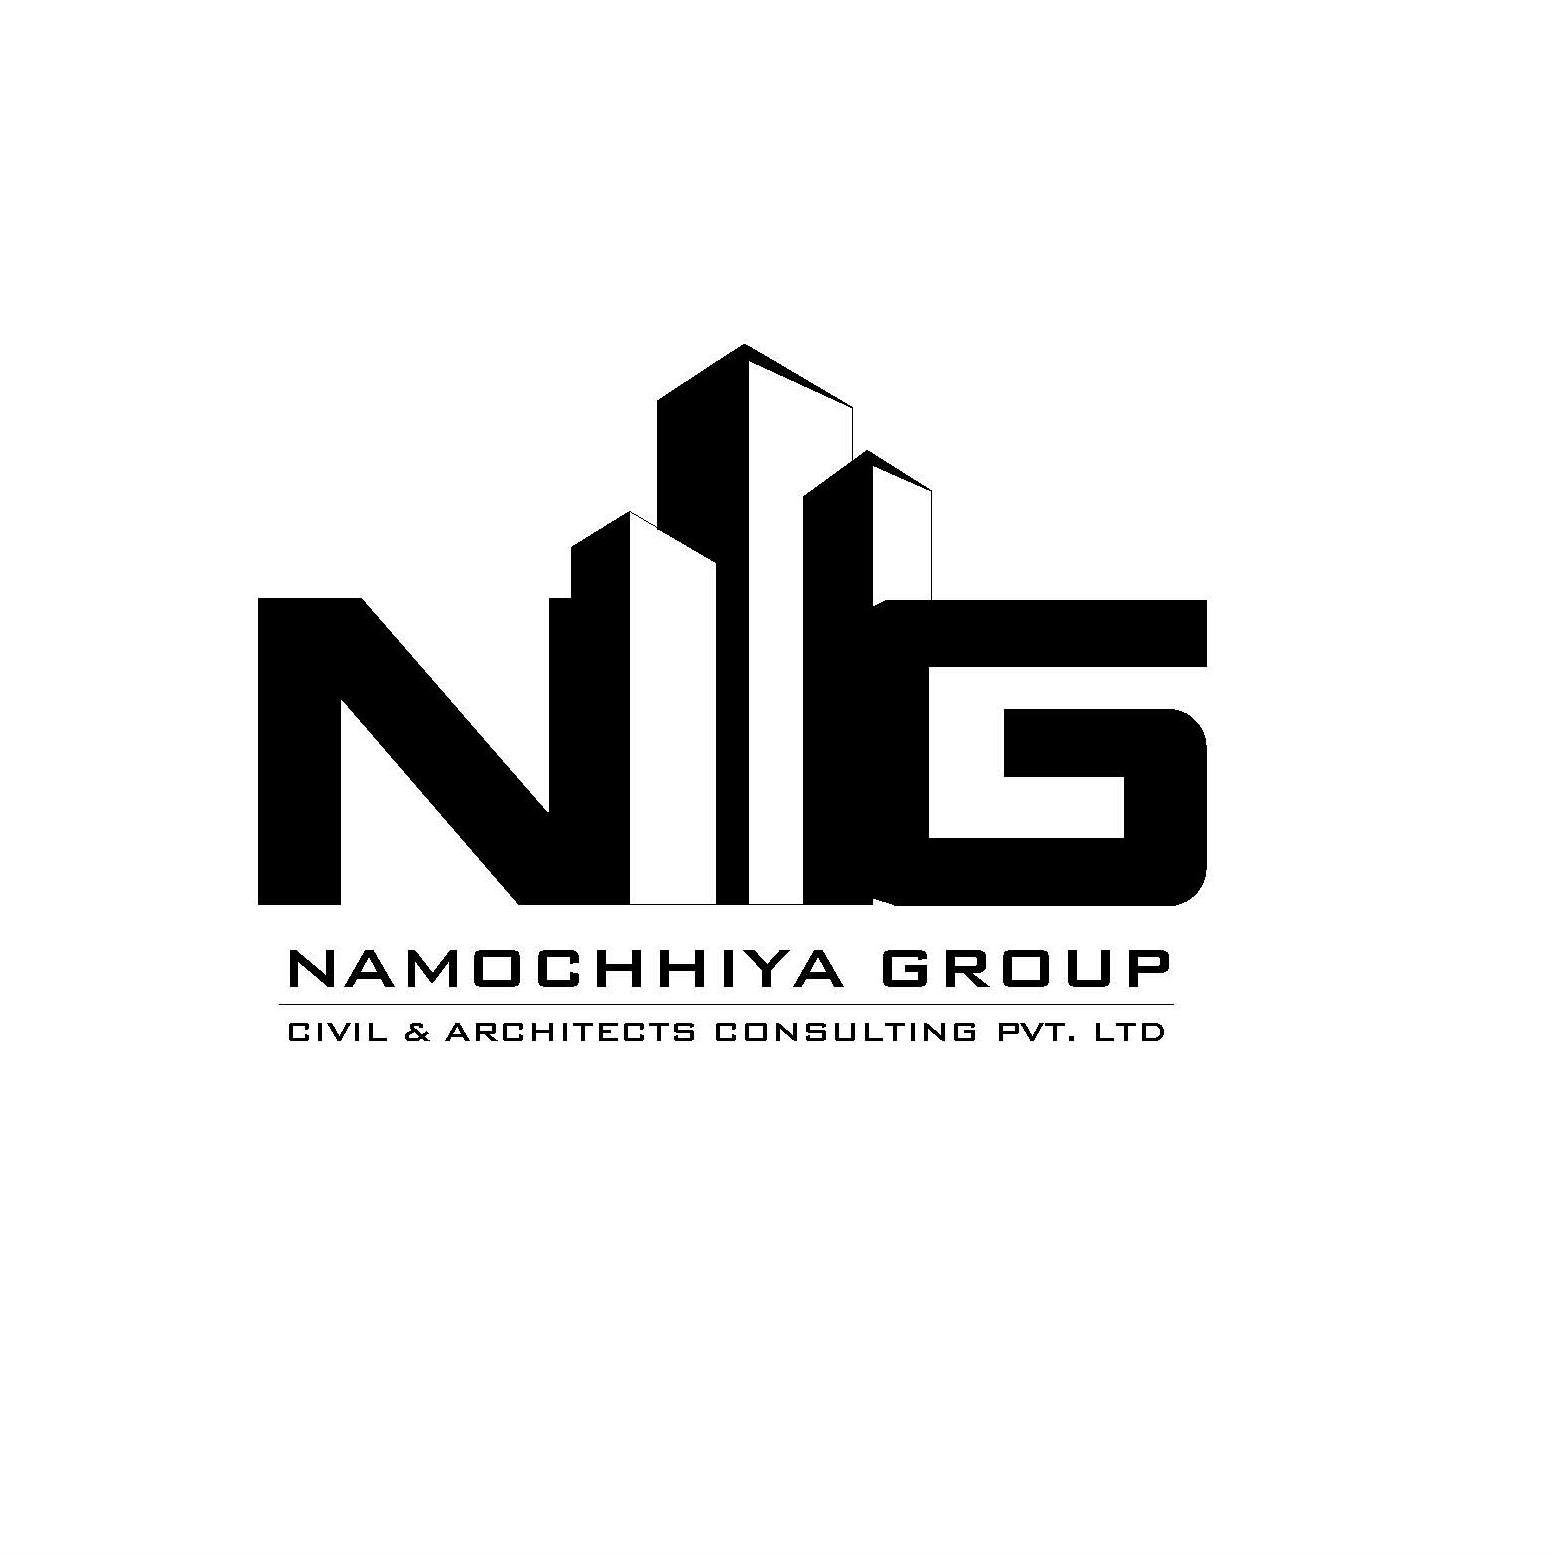 NG Civil & Architects Consulting Pvt. Ltd.